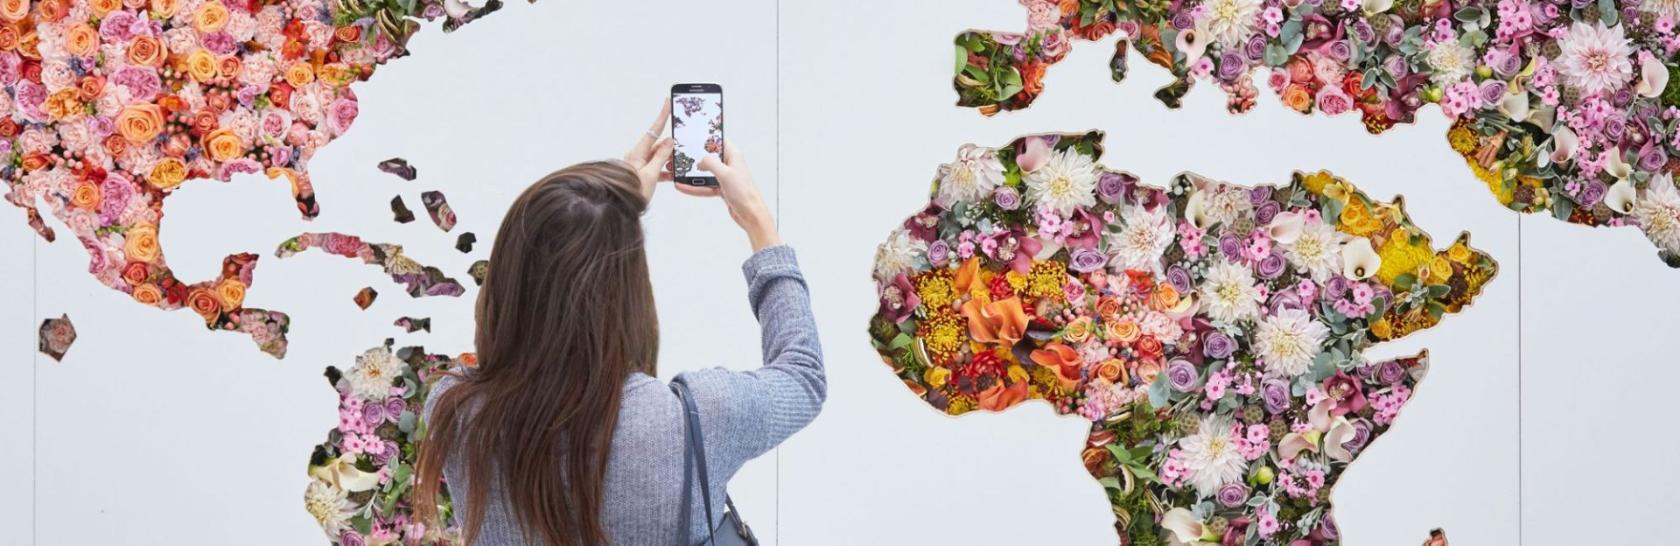 Lady taking picture of  a floral map